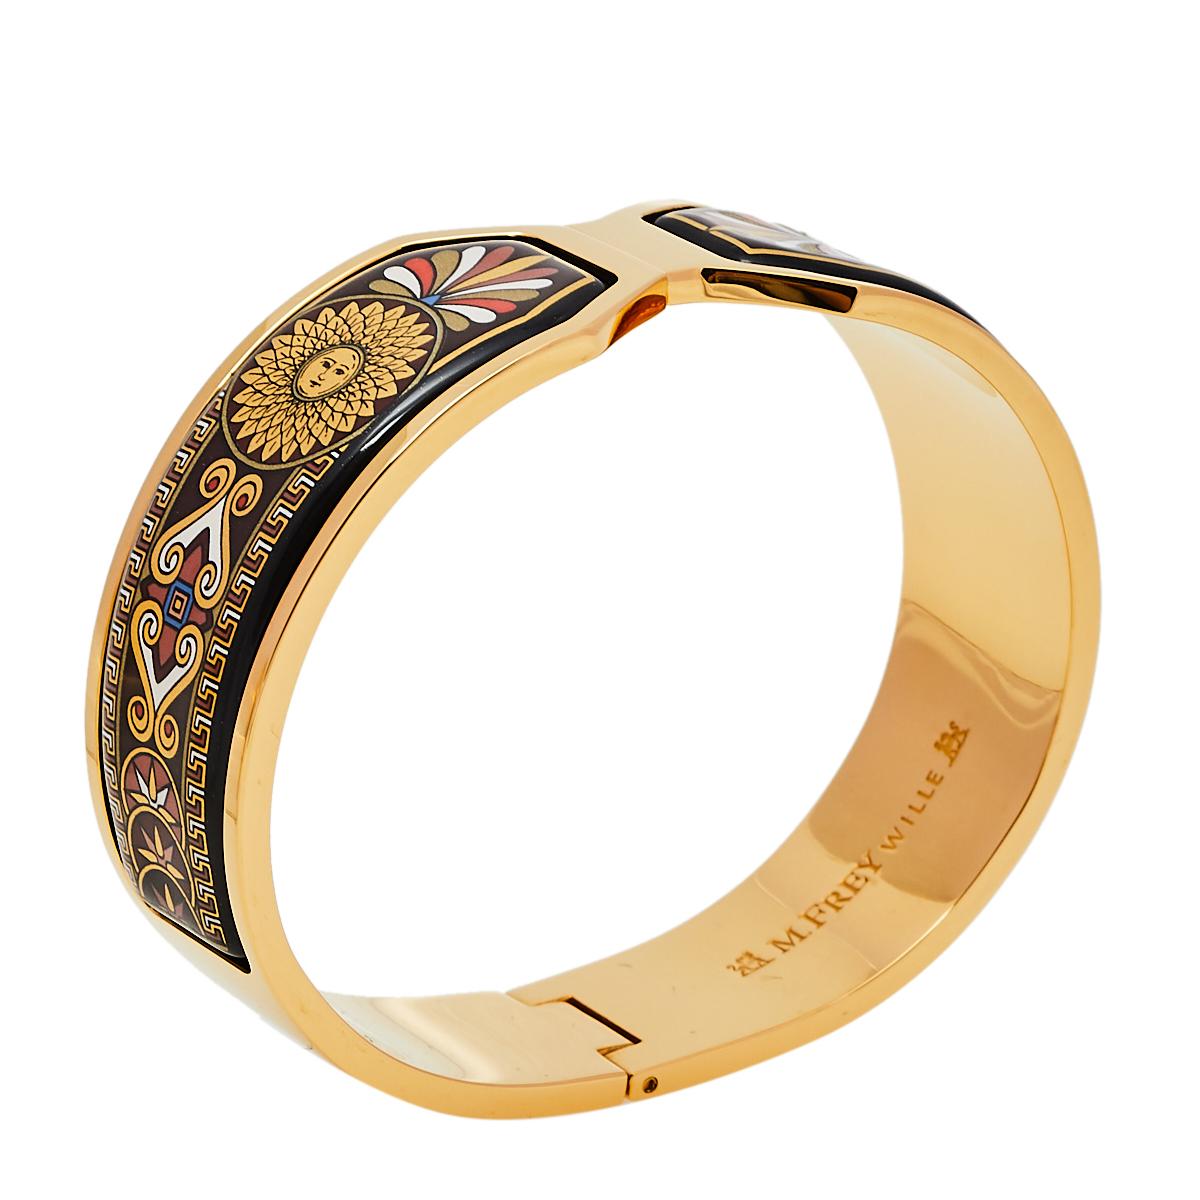 Each piece from Frey Wille is designed with a lot of thought and deep-rooted design philosophy. The bracelet in gold tone is embellished with fire enamel all over the surface and shaped narrow towards the clasp. Style your looks with this meaningful